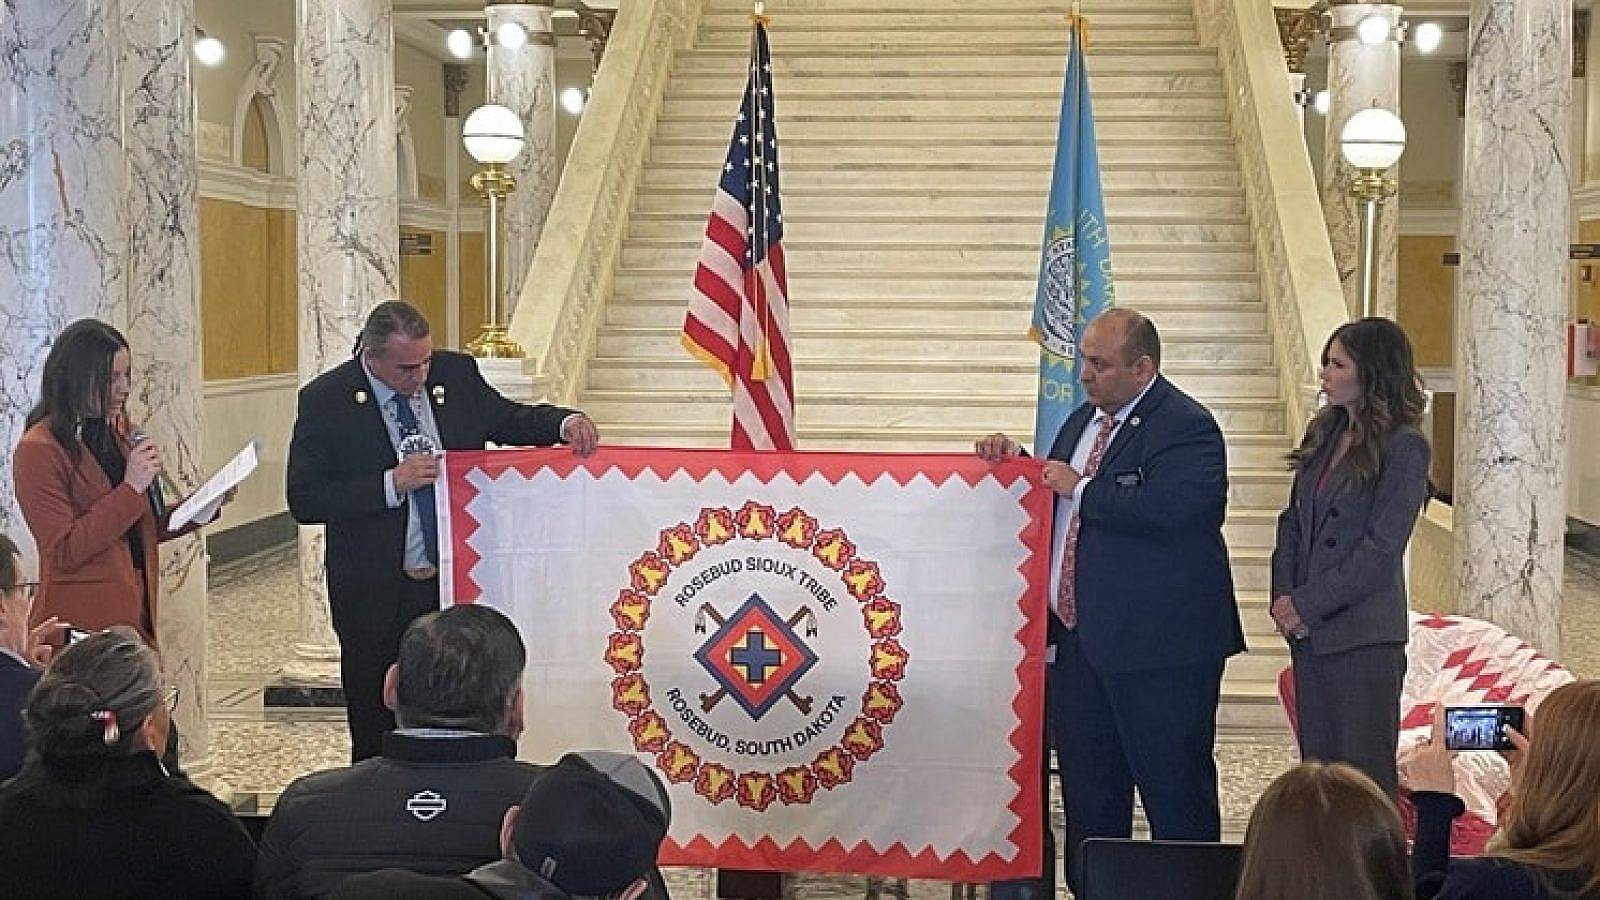 Native American tribal flag displayed at state capitol building